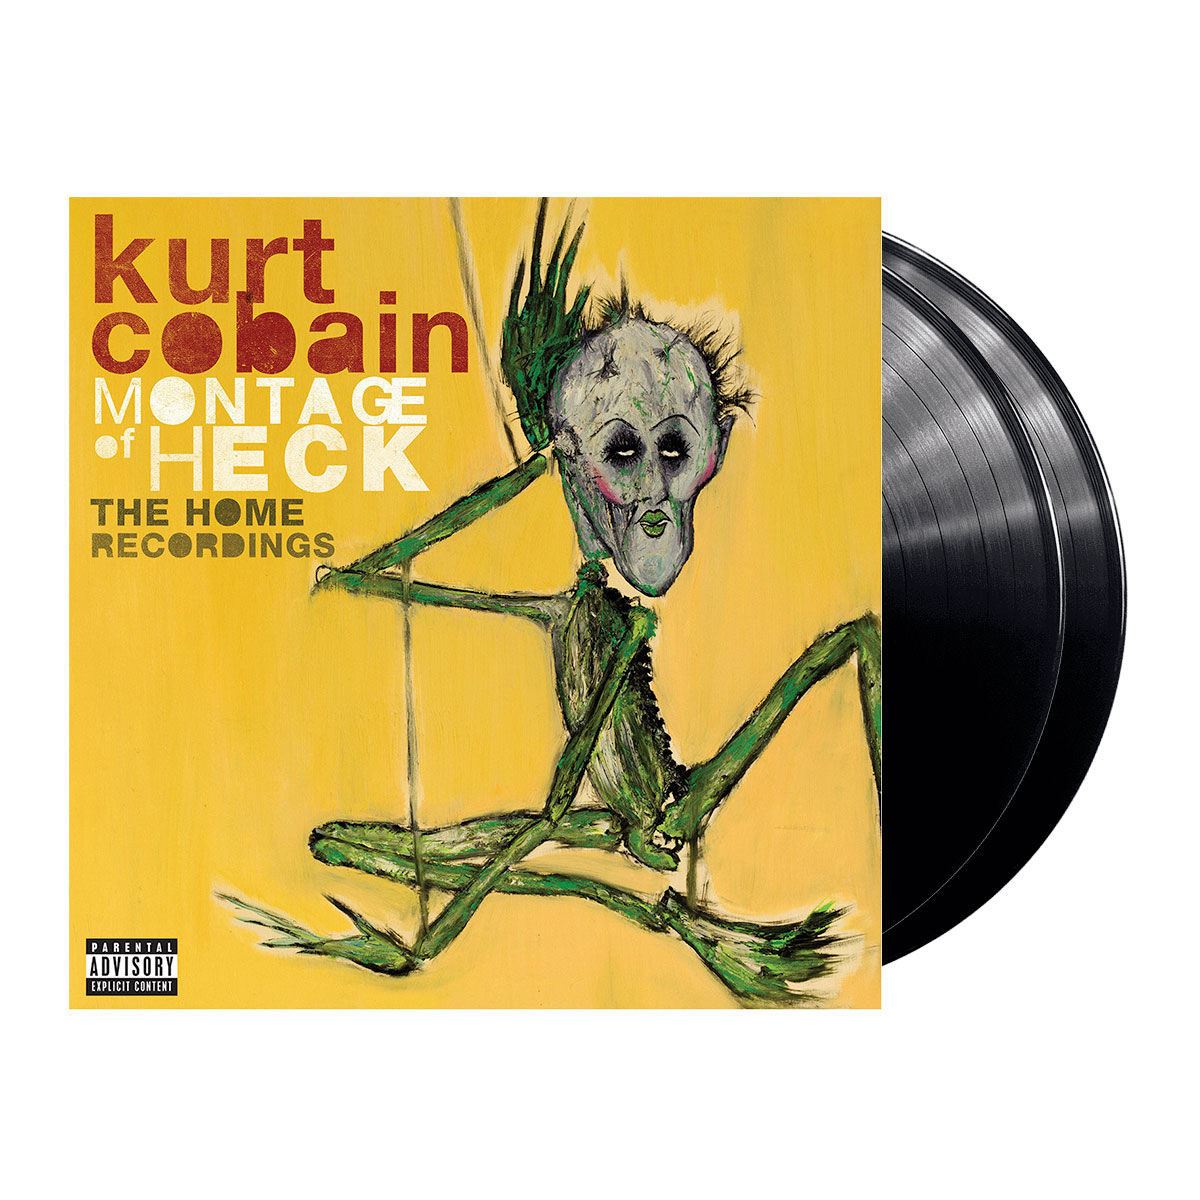 LP2 Kurt Cobain- Montage Of Heck: The Home Recordings